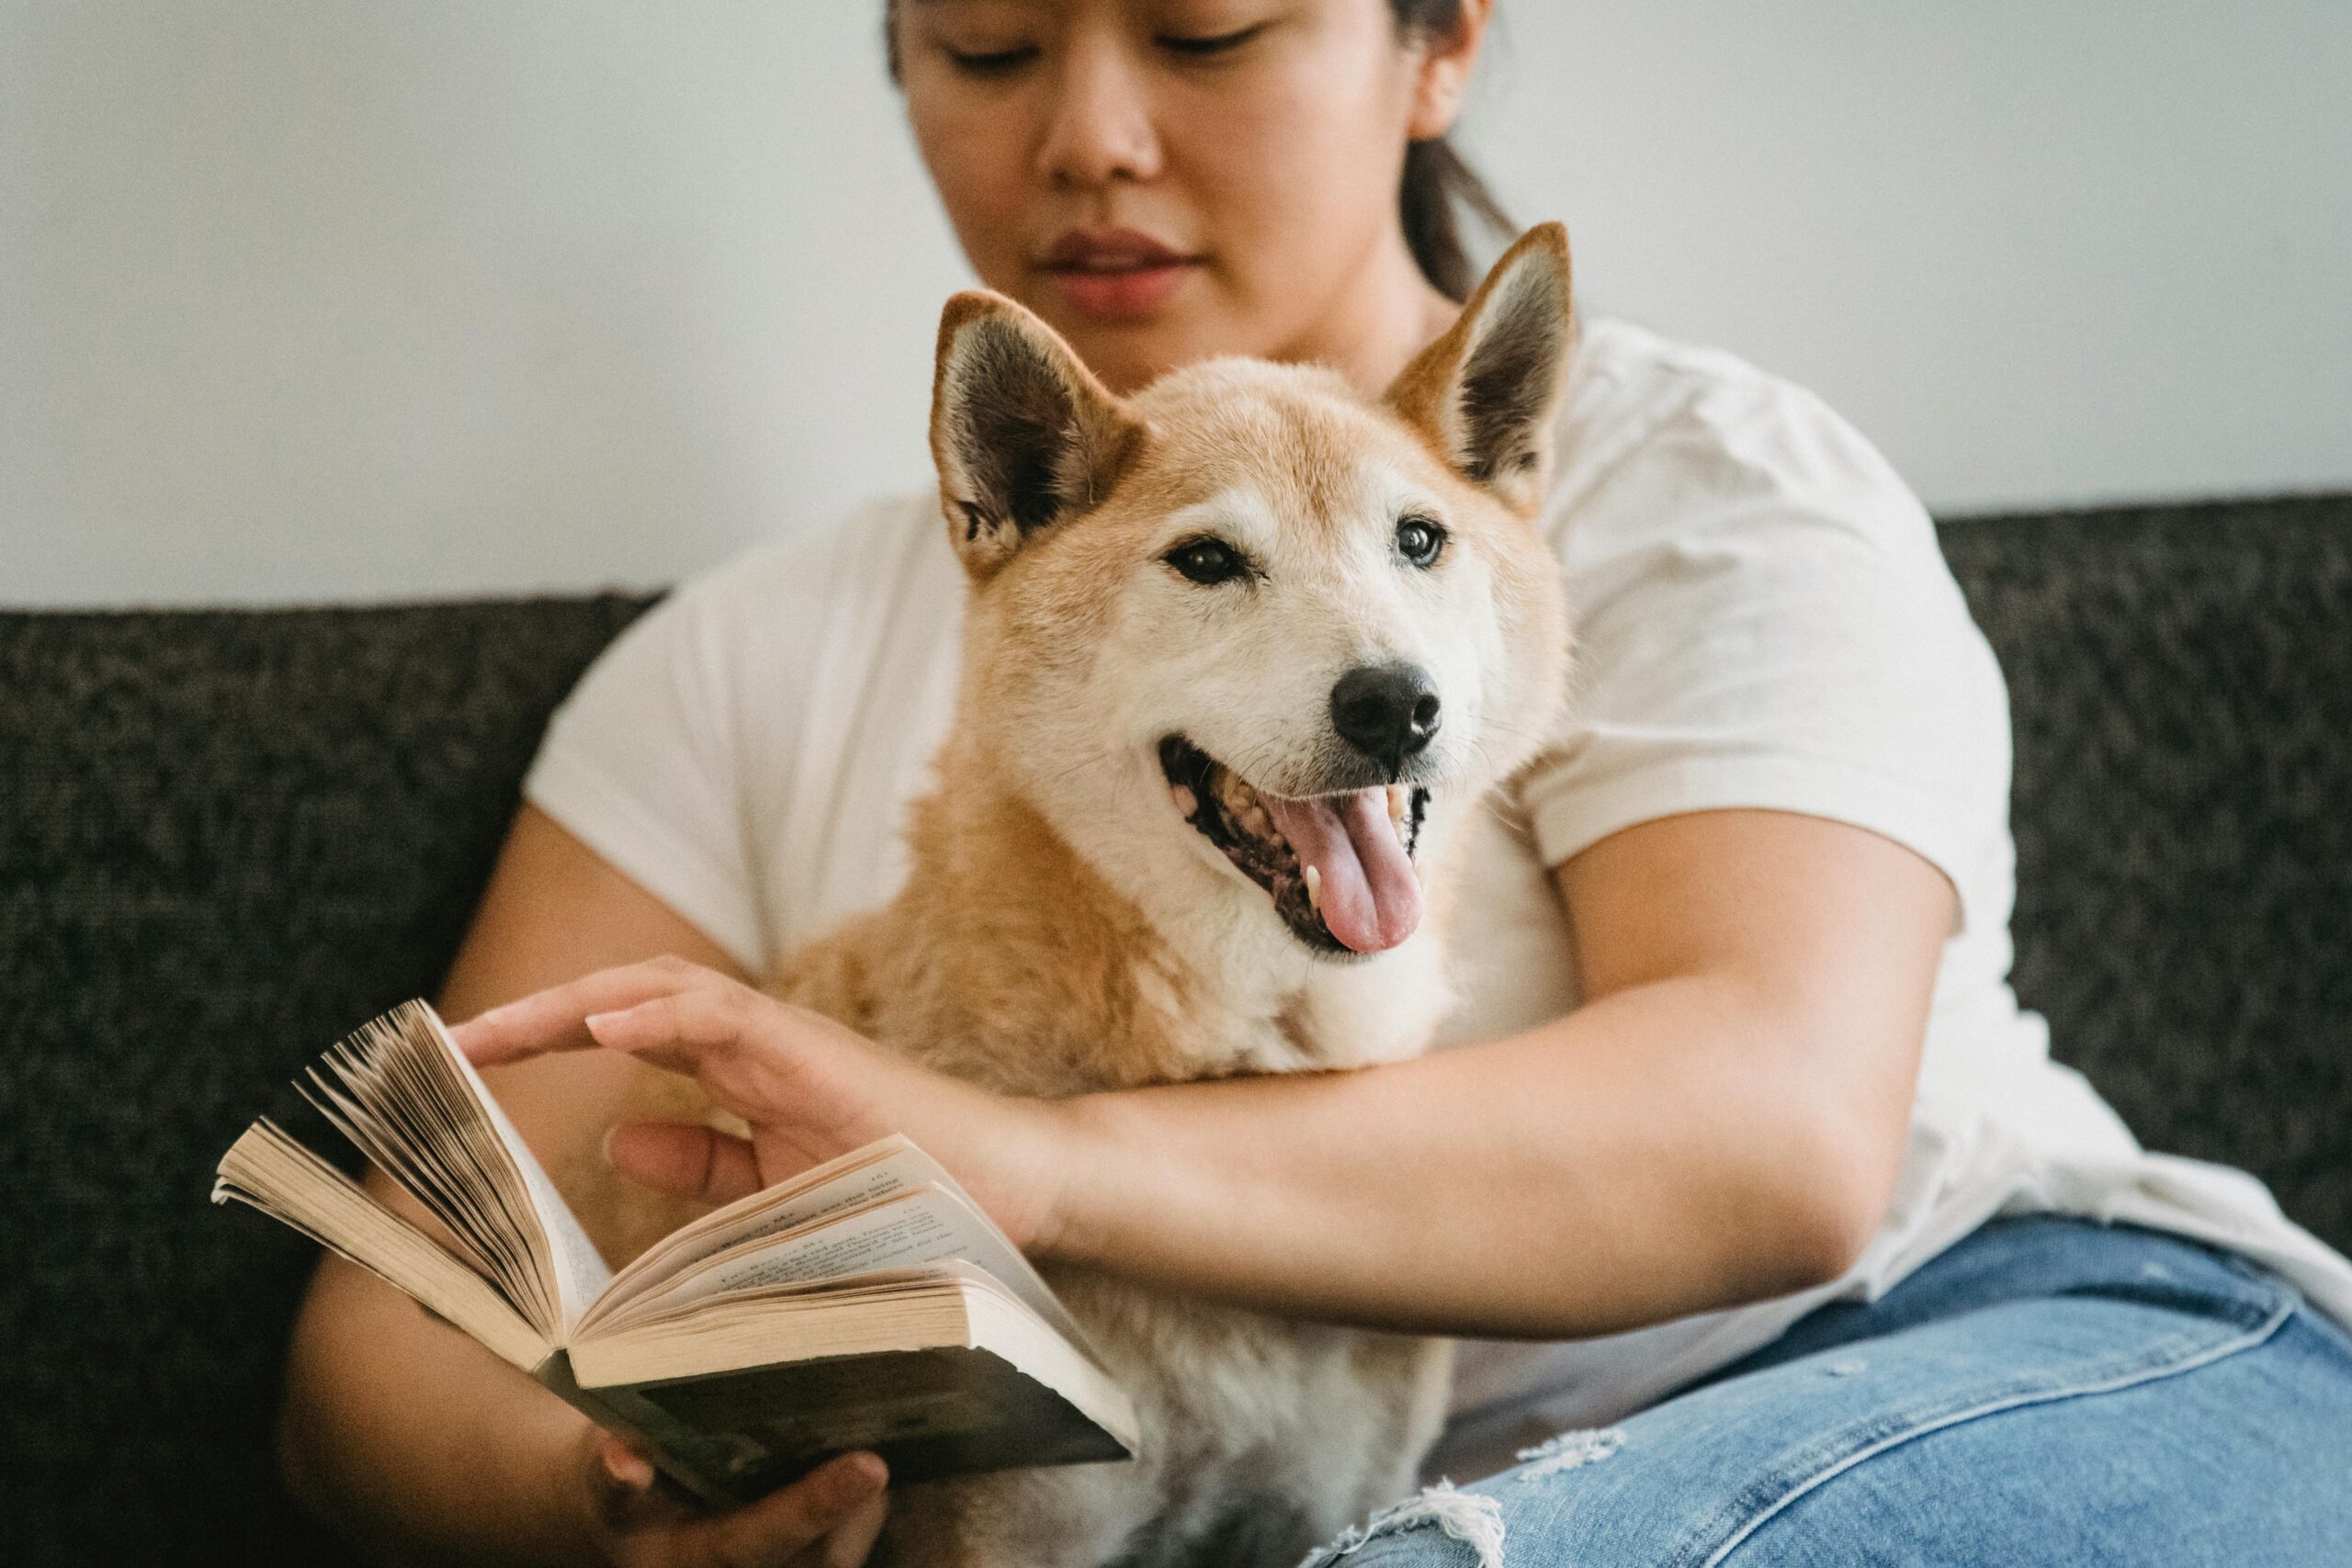 Keeping Your Dog Healthy - 5 Tips to Make Them Feel Better